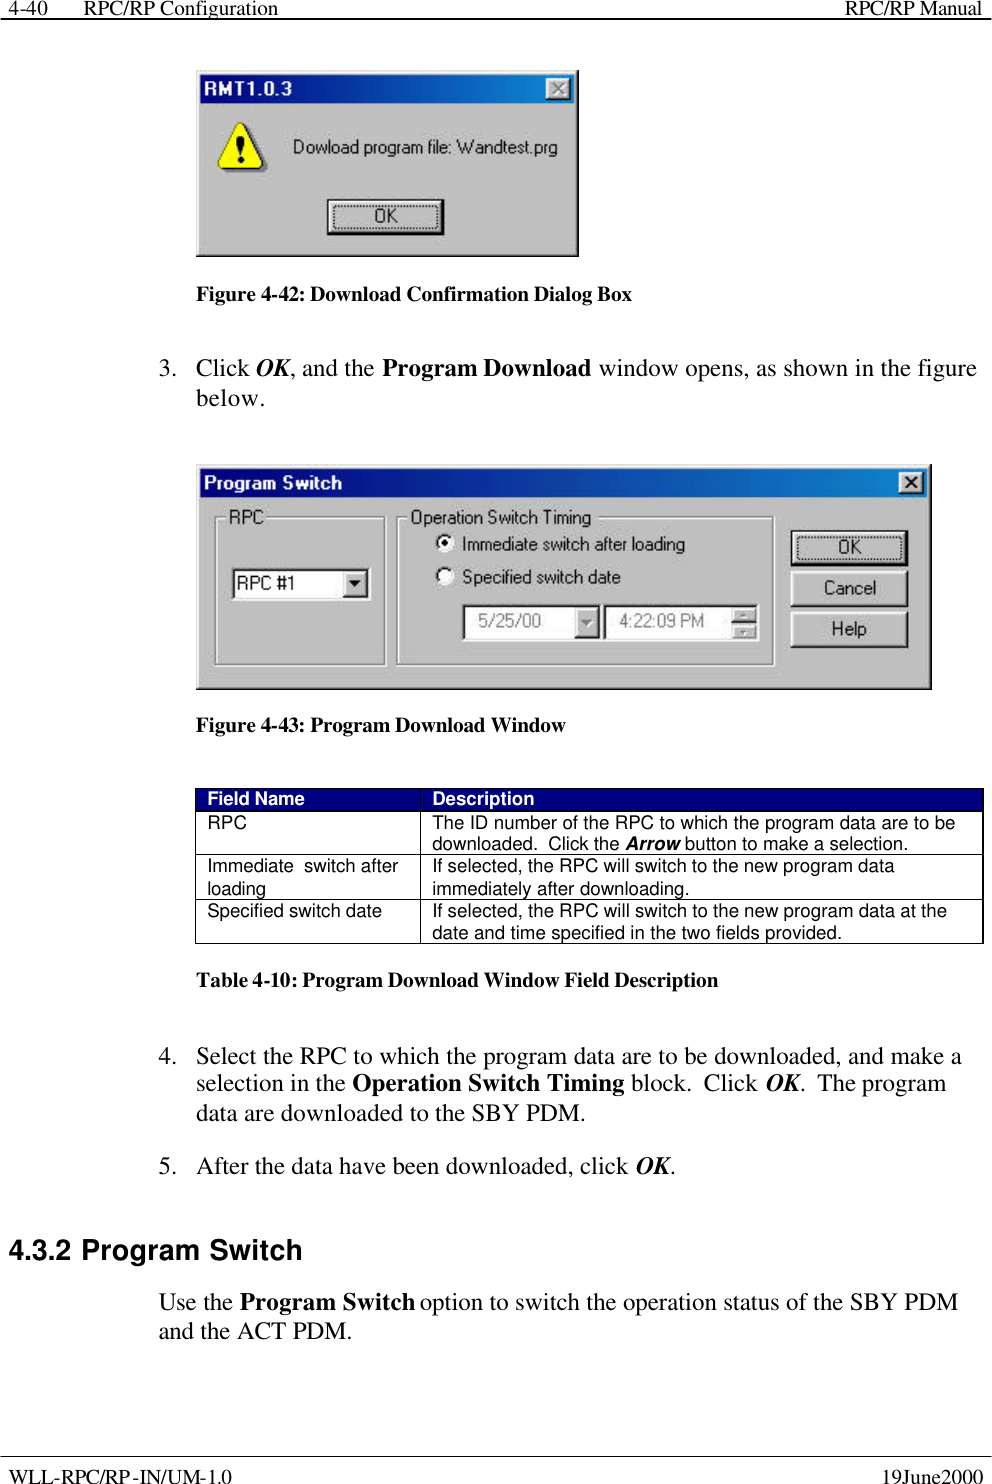  RPC/RP Configuration    RPC/RP Manual   WLL-RPC/RP-IN/UM-1.0    19June2000 4-40 Figure 4-42: Download Confirmation Dialog Box 3.  Click OK, and the Program Download window opens, as shown in the figure below.  Figure 4-43: Program Download Window Field Name Description RPC The ID number of the RPC to which the program data are to be downloaded.  Click the Arrow button to make a selection. Immediate  switch after loading If selected, the RPC will switch to the new program data immediately after downloading. Specified switch date If selected, the RPC will switch to the new program data at the date and time specified in the two fields provided. Table 4-10: Program Download Window Field Description 4.  Select the RPC to which the program data are to be downloaded, and make a selection in the Operation Switch Timing block.  Click OK.  The program data are downloaded to the SBY PDM.   5.  After the data have been downloaded, click OK. 4.3.2 Program Switch Use the Program Switch option to switch the operation status of the SBY PDM and the ACT PDM. 